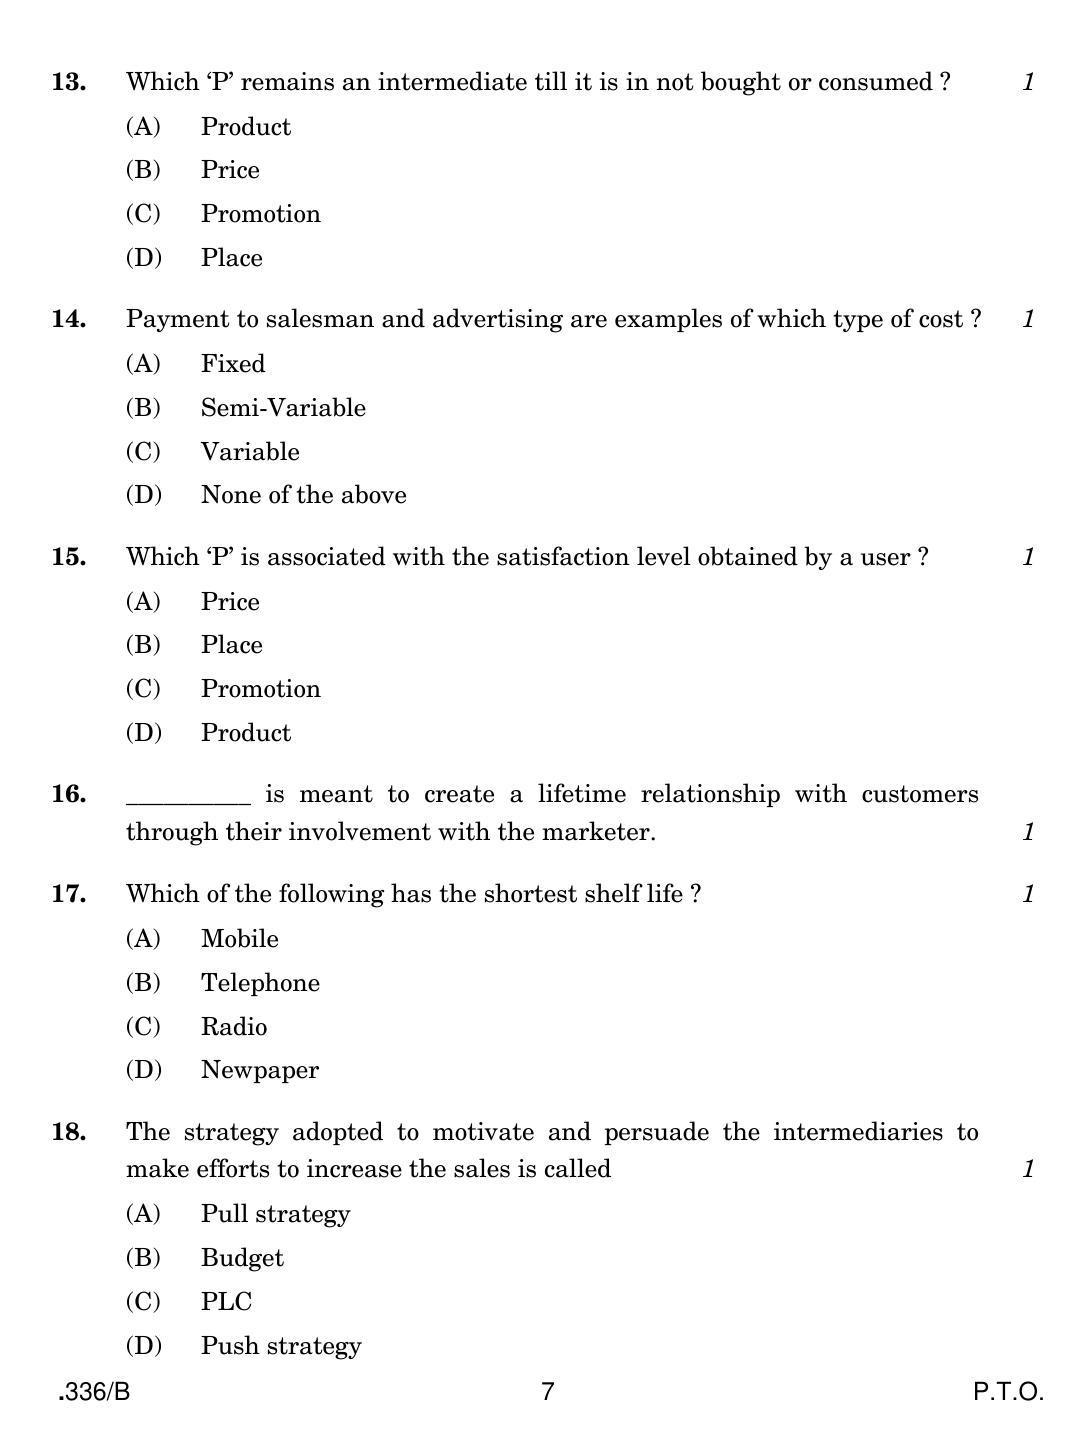 CBSE Class 12 Marketing 2020 Compartment Question Paper - Page 7